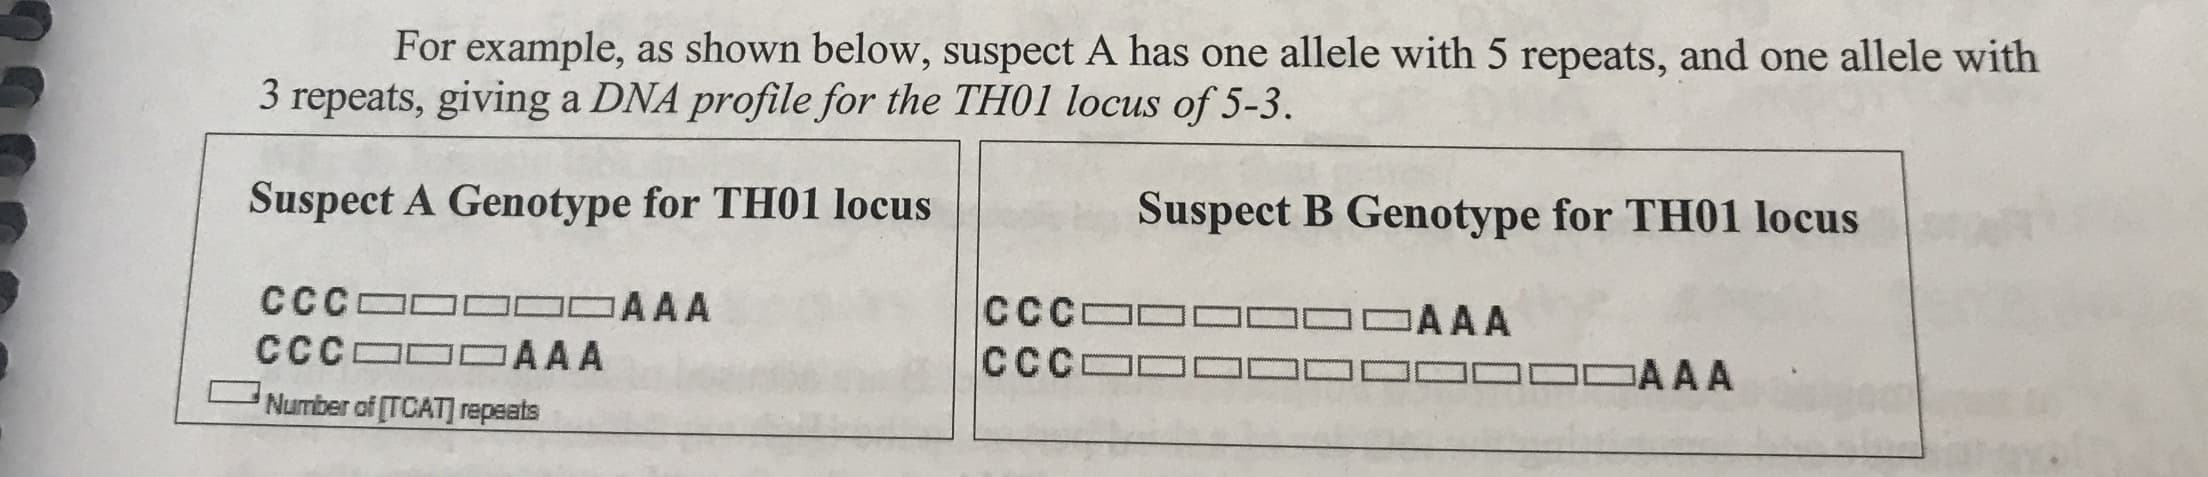 For example, as shown below, suspect A has one allele with 5 repeats, and one allele with
3 repeats, giving a DNA profile for the TH01 locus of 5-3.
Suspect A Genotype for TH01 locus
Suspect B Genotype for TH01 locus
CCC
AAA
CCC
CCC
AAA
CCC
AAA
AAA
Number of [TCAT] repaats
